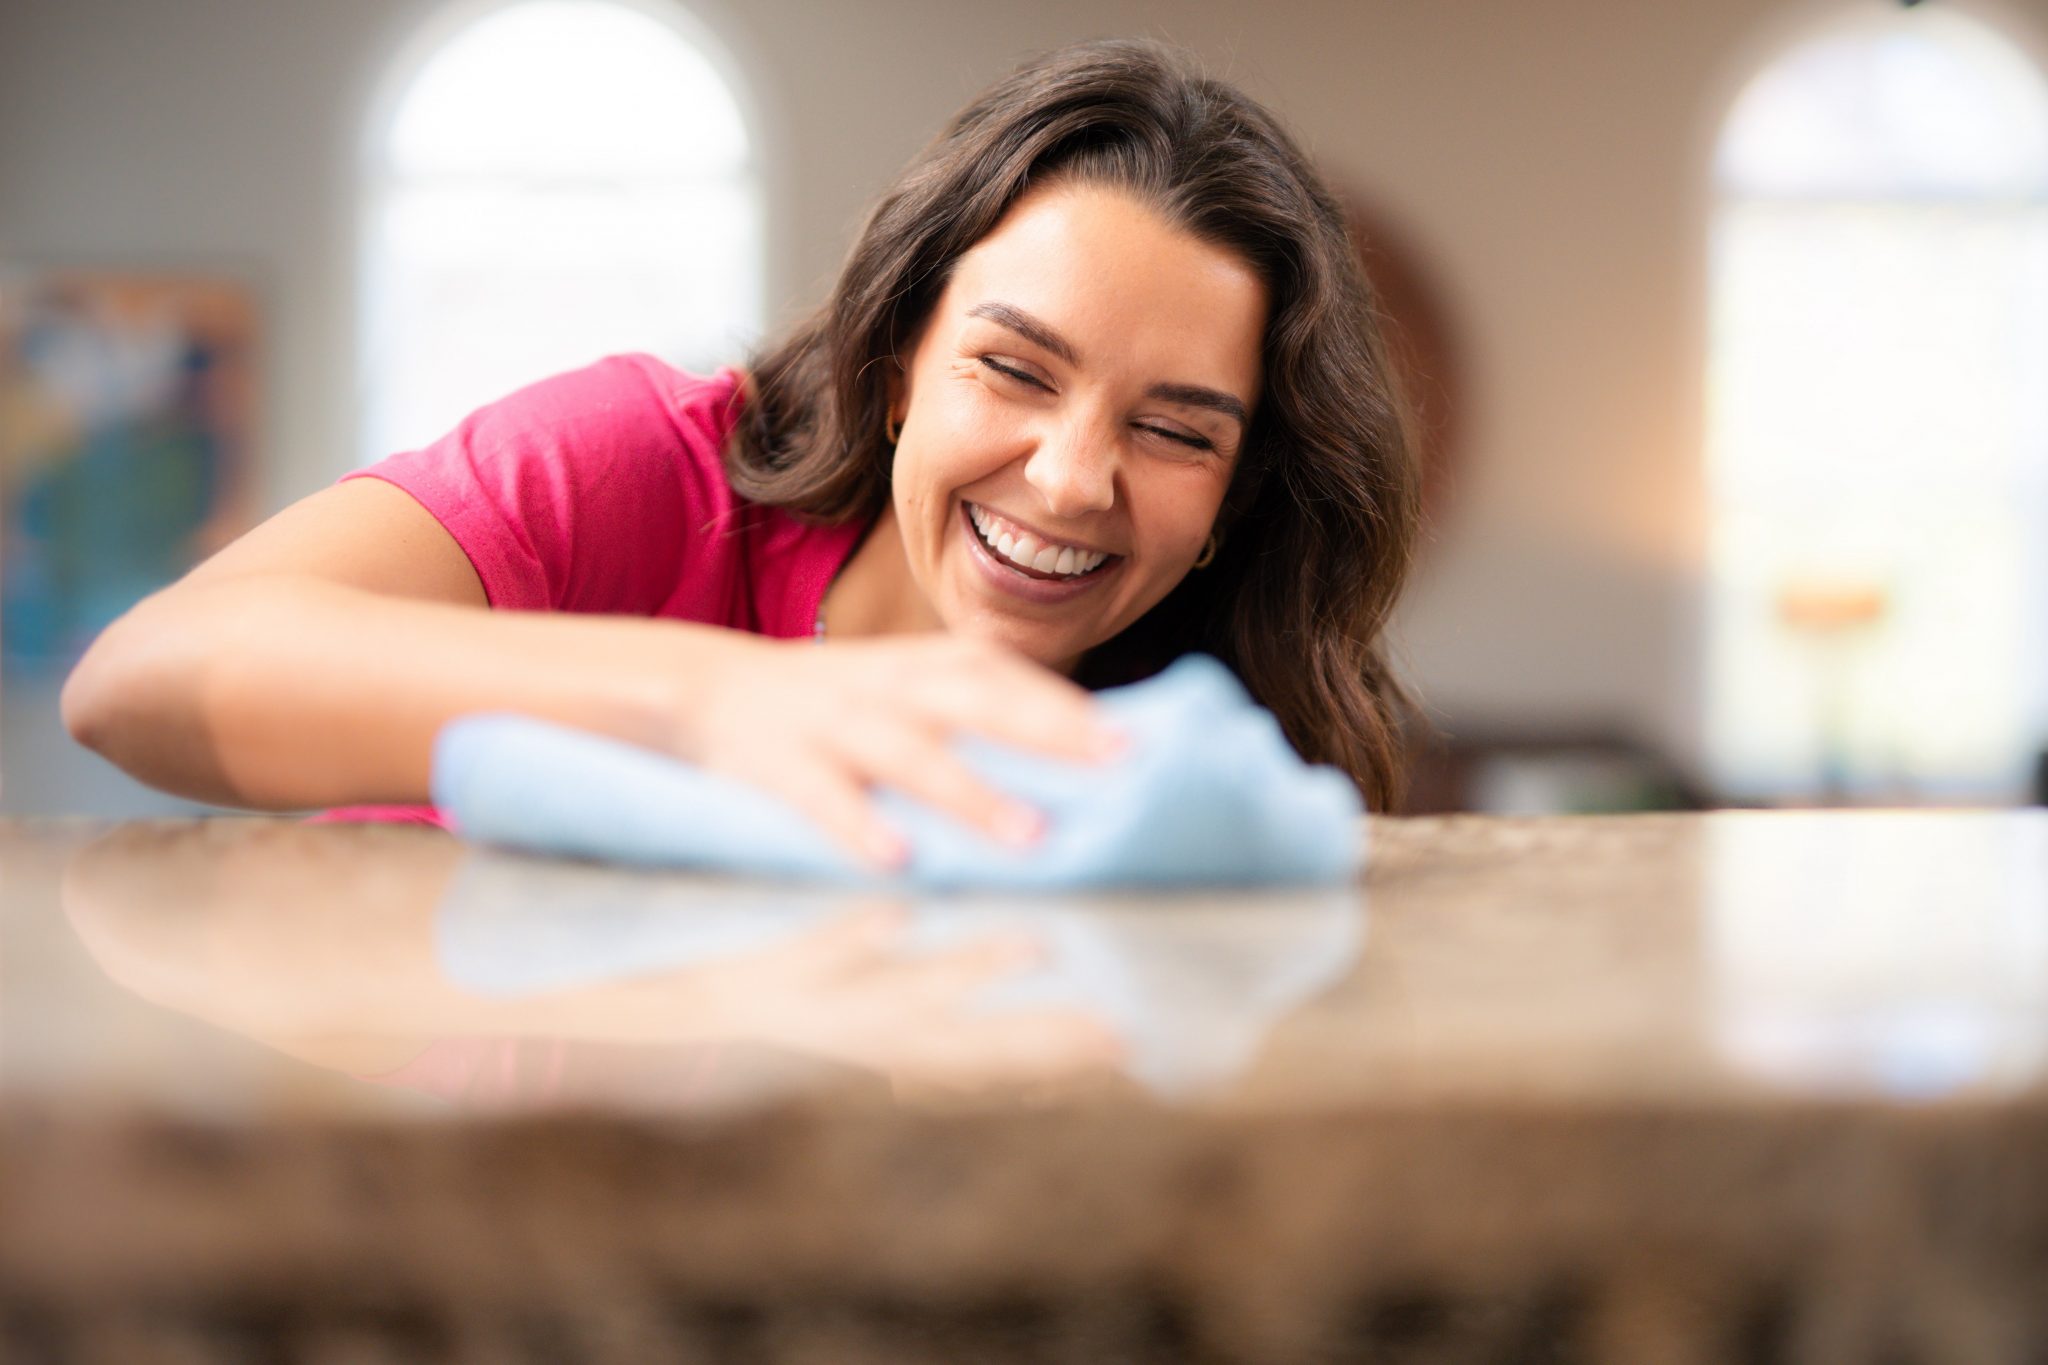 better life maids, house cleaning in wildwood, house cleaning near me, house cleaning near wildwood, best maids in uwildwood, best maid service near me, top quality maids, residential cleaner, move out maids wildwood, green cleaning, eco cleaning